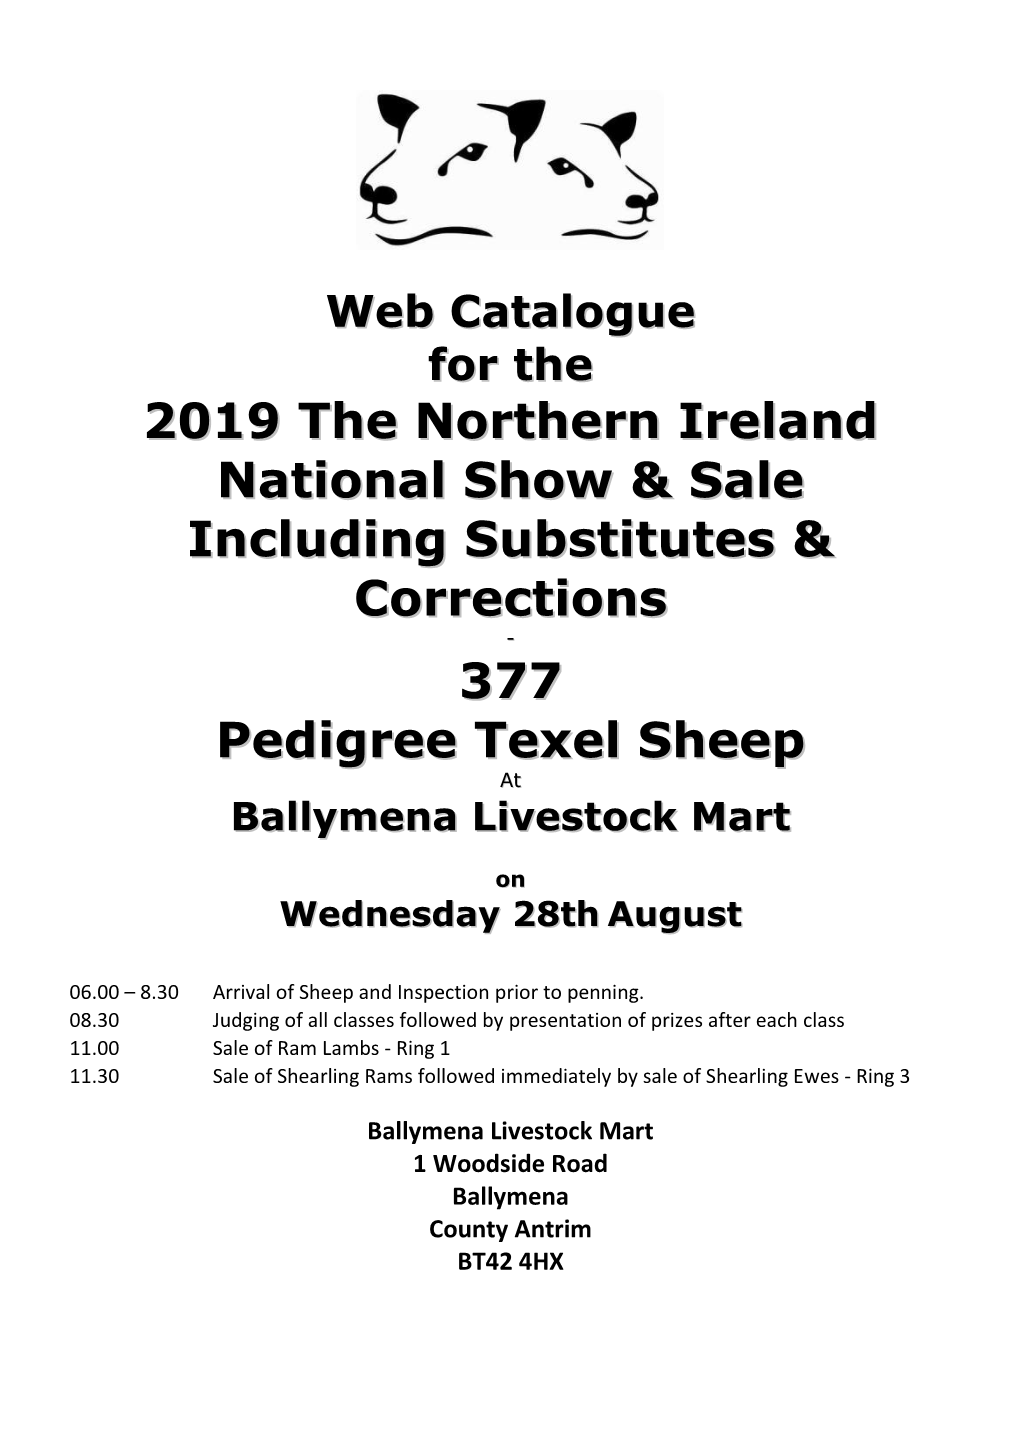 2019 the Northern Ireland National Show & Sale Including Substitutes